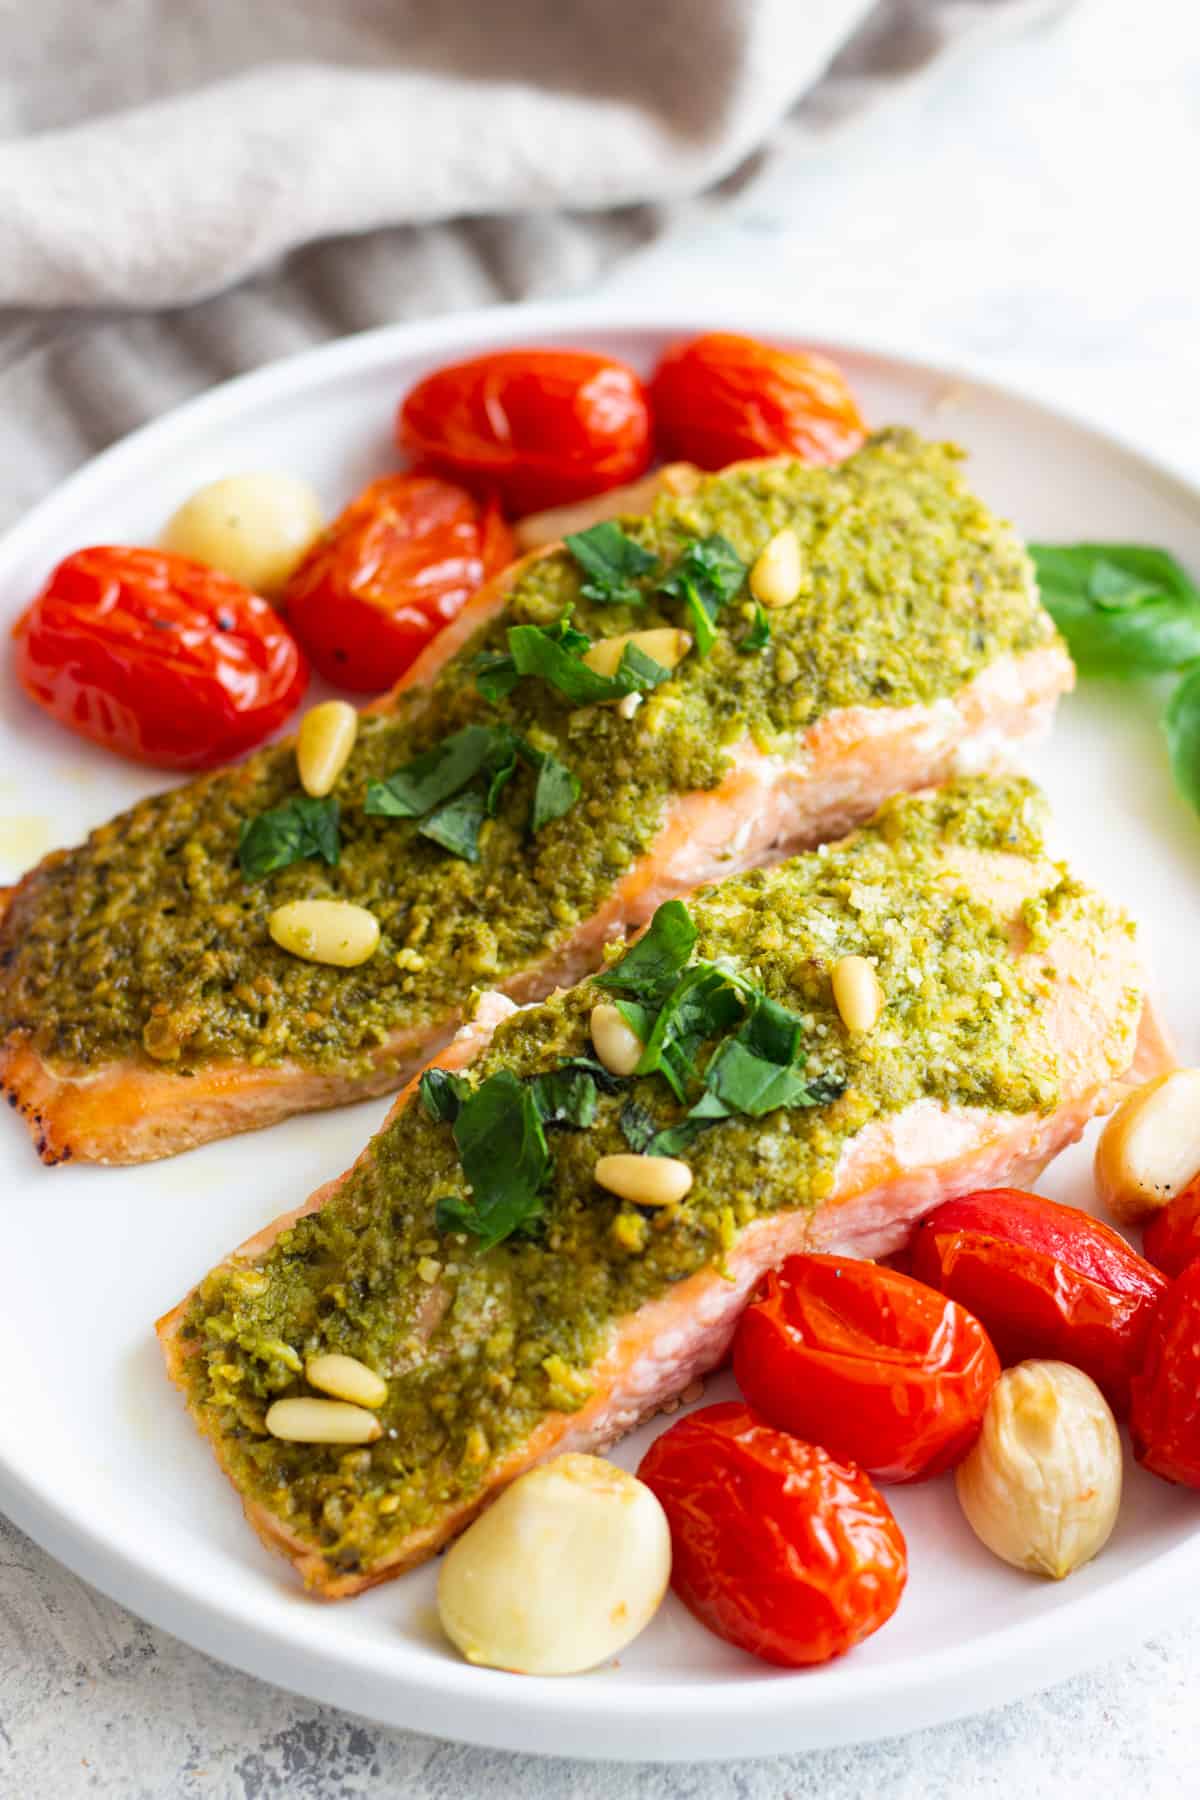 Here is an easy baked pesto salmon recipe that even picky eaters will love! Have dinner on the table within 25 minutes using this simple yet delicious recipe.